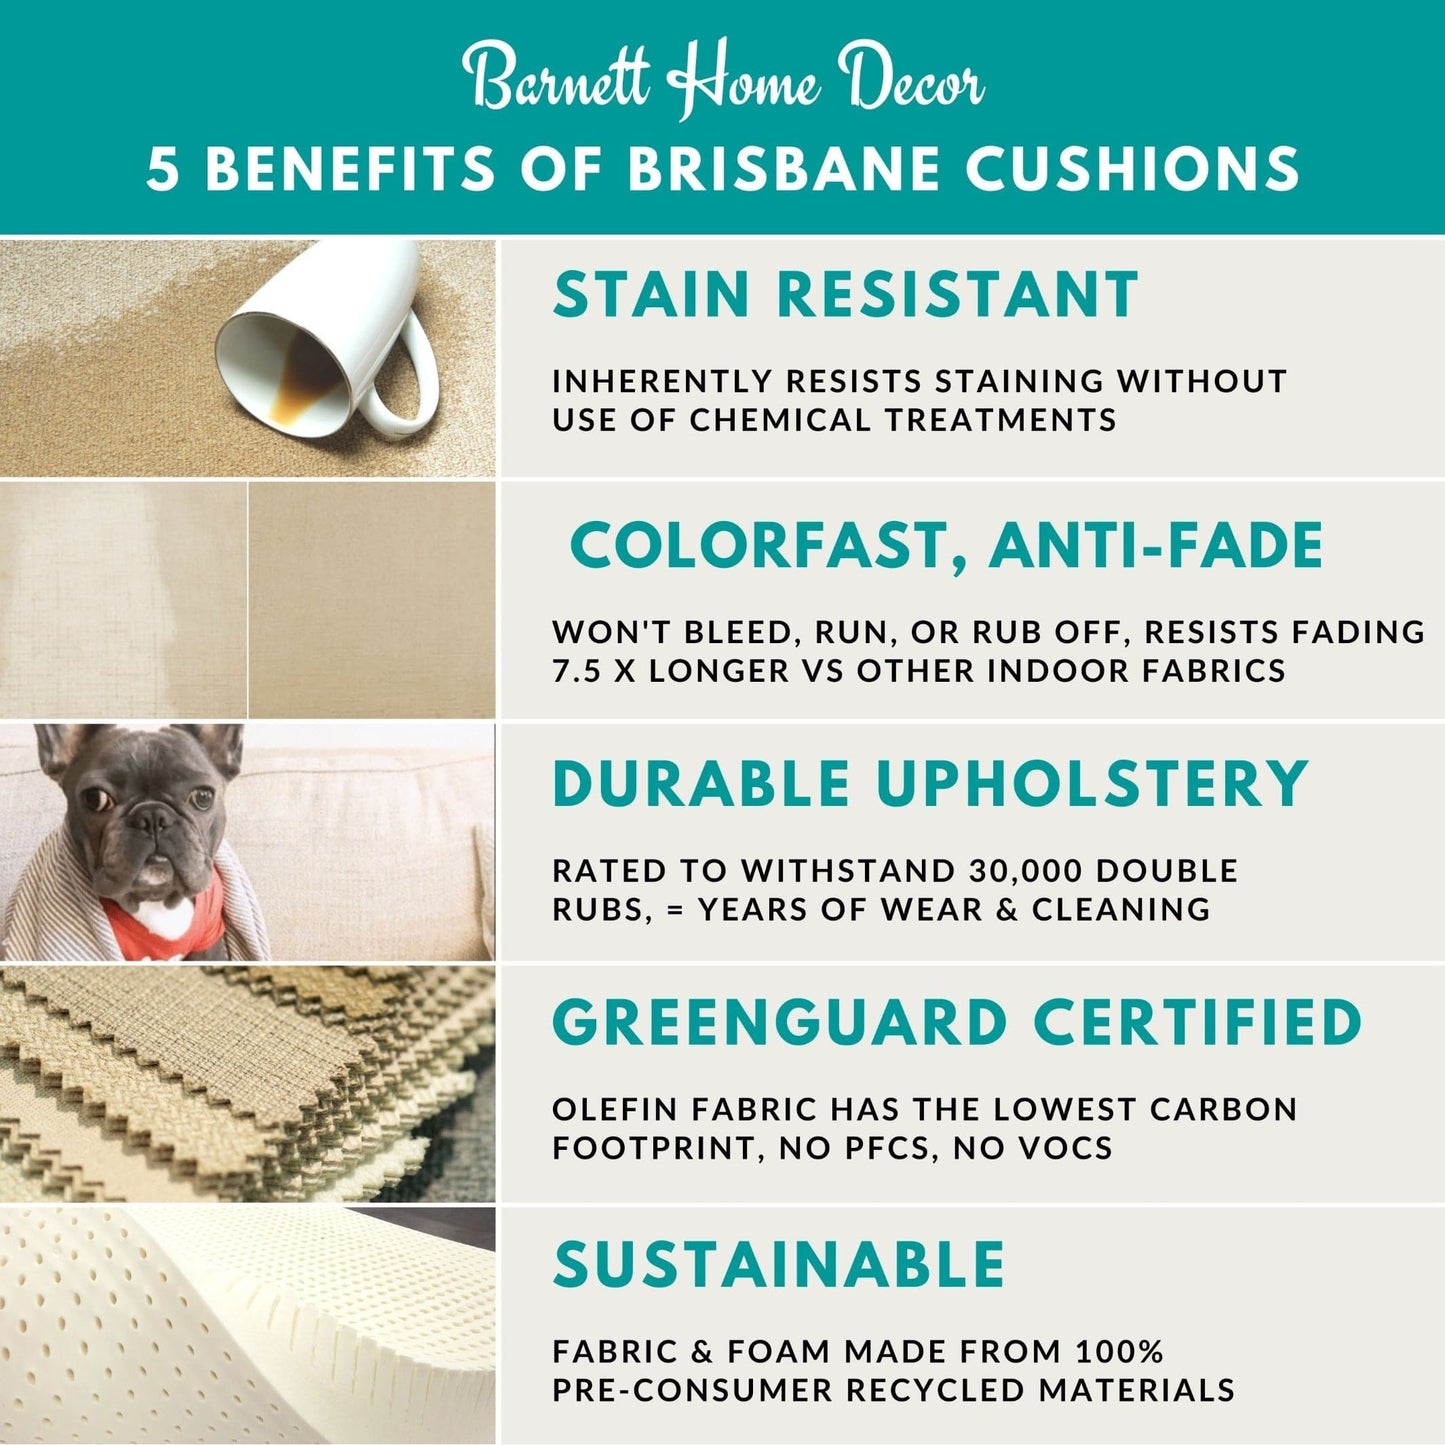 Barnett Home Decor Benefits of Brisbane Cushions Stain Resistant, Anti-Fade,  Durable Upholstery, Greenguard Certified, Sustainable